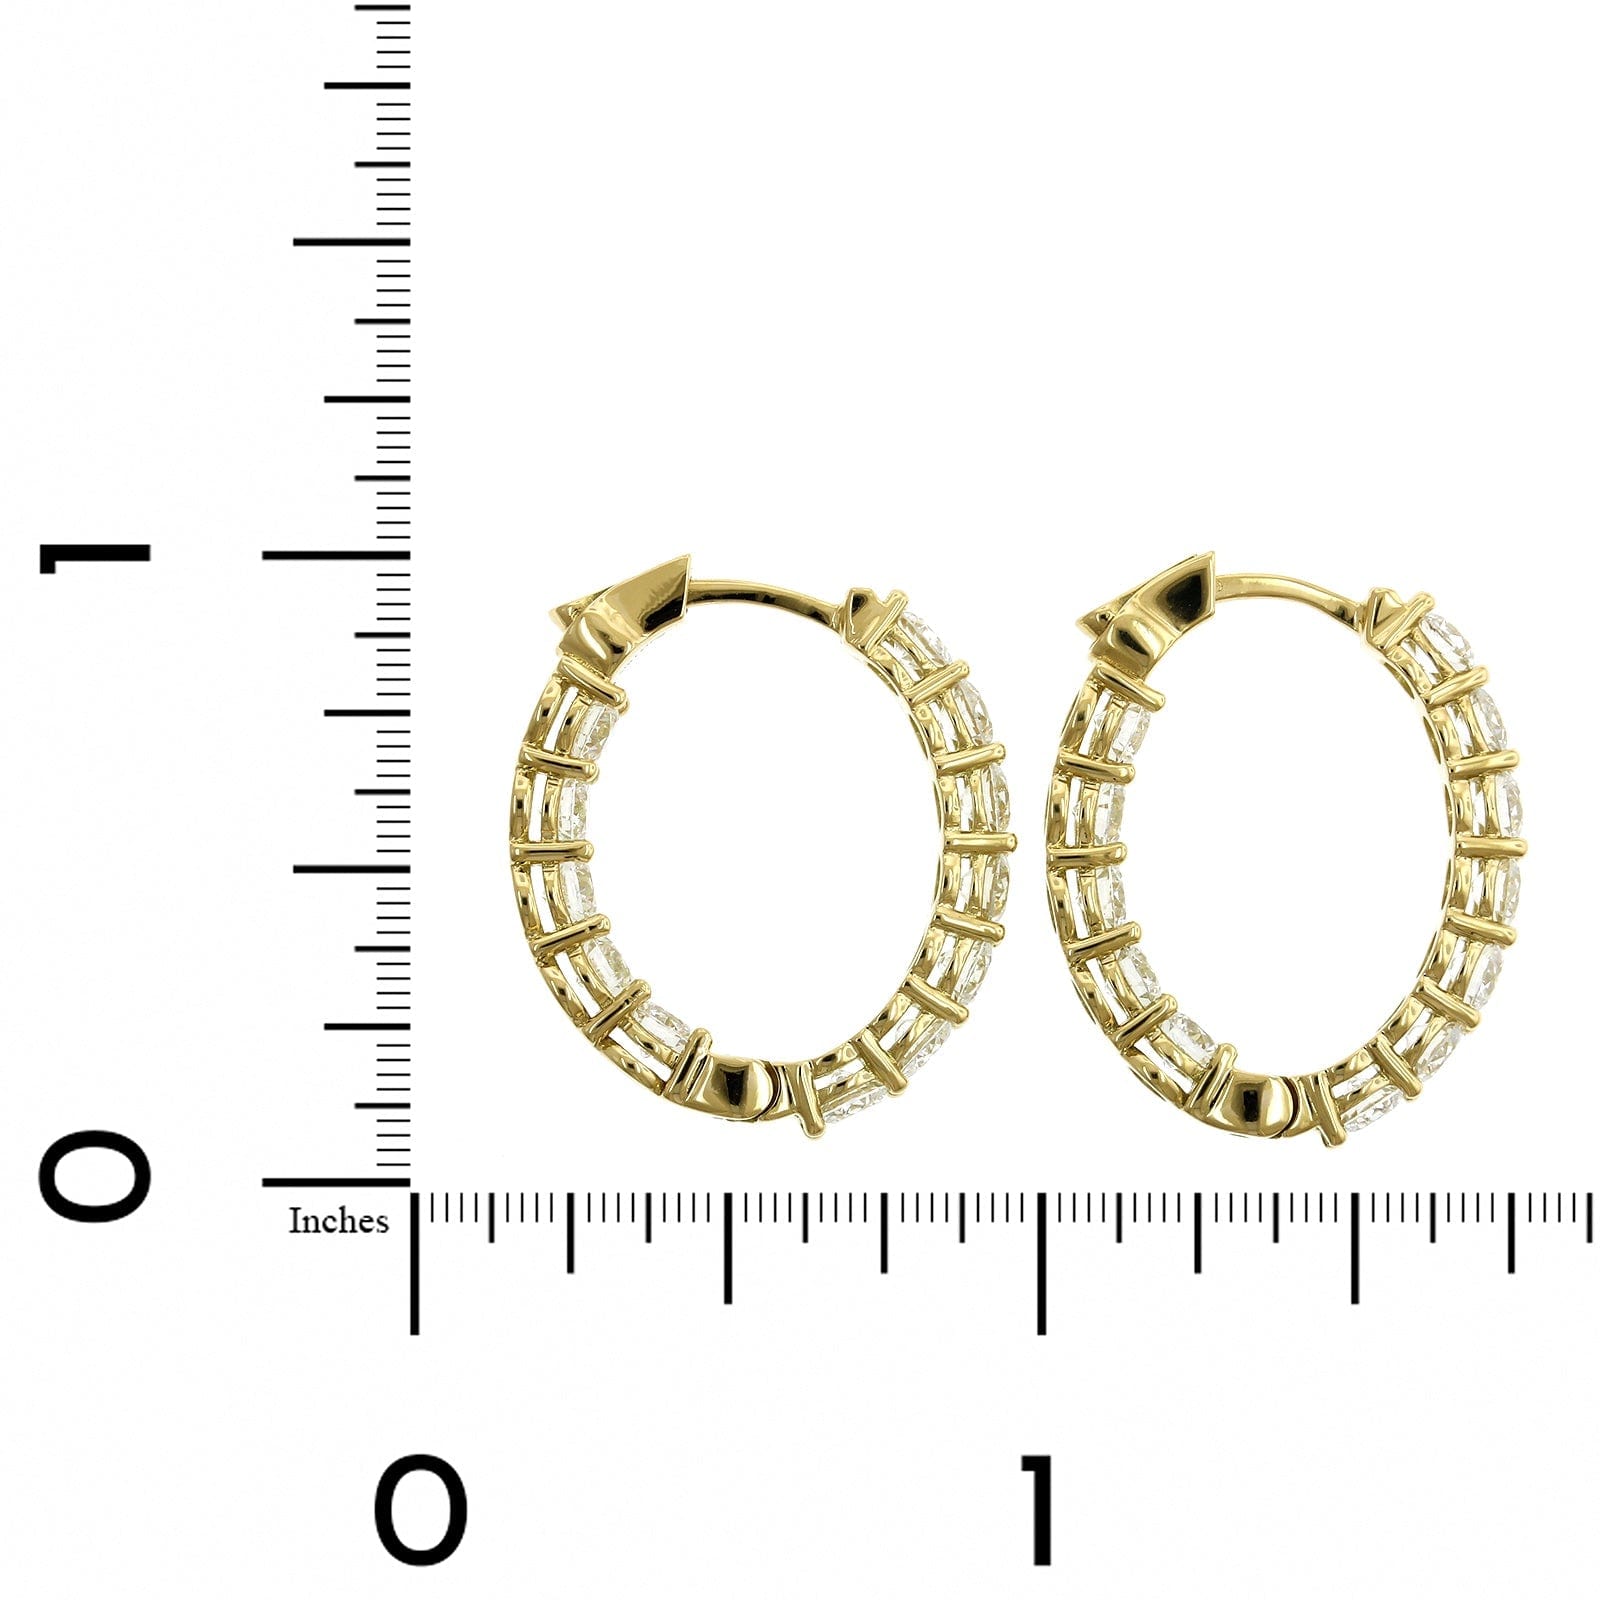 Cobblestone Hoop Earrings with Diamond Accents in 18K Yellow Gold, Style #E-2602-0-DIA-18KY